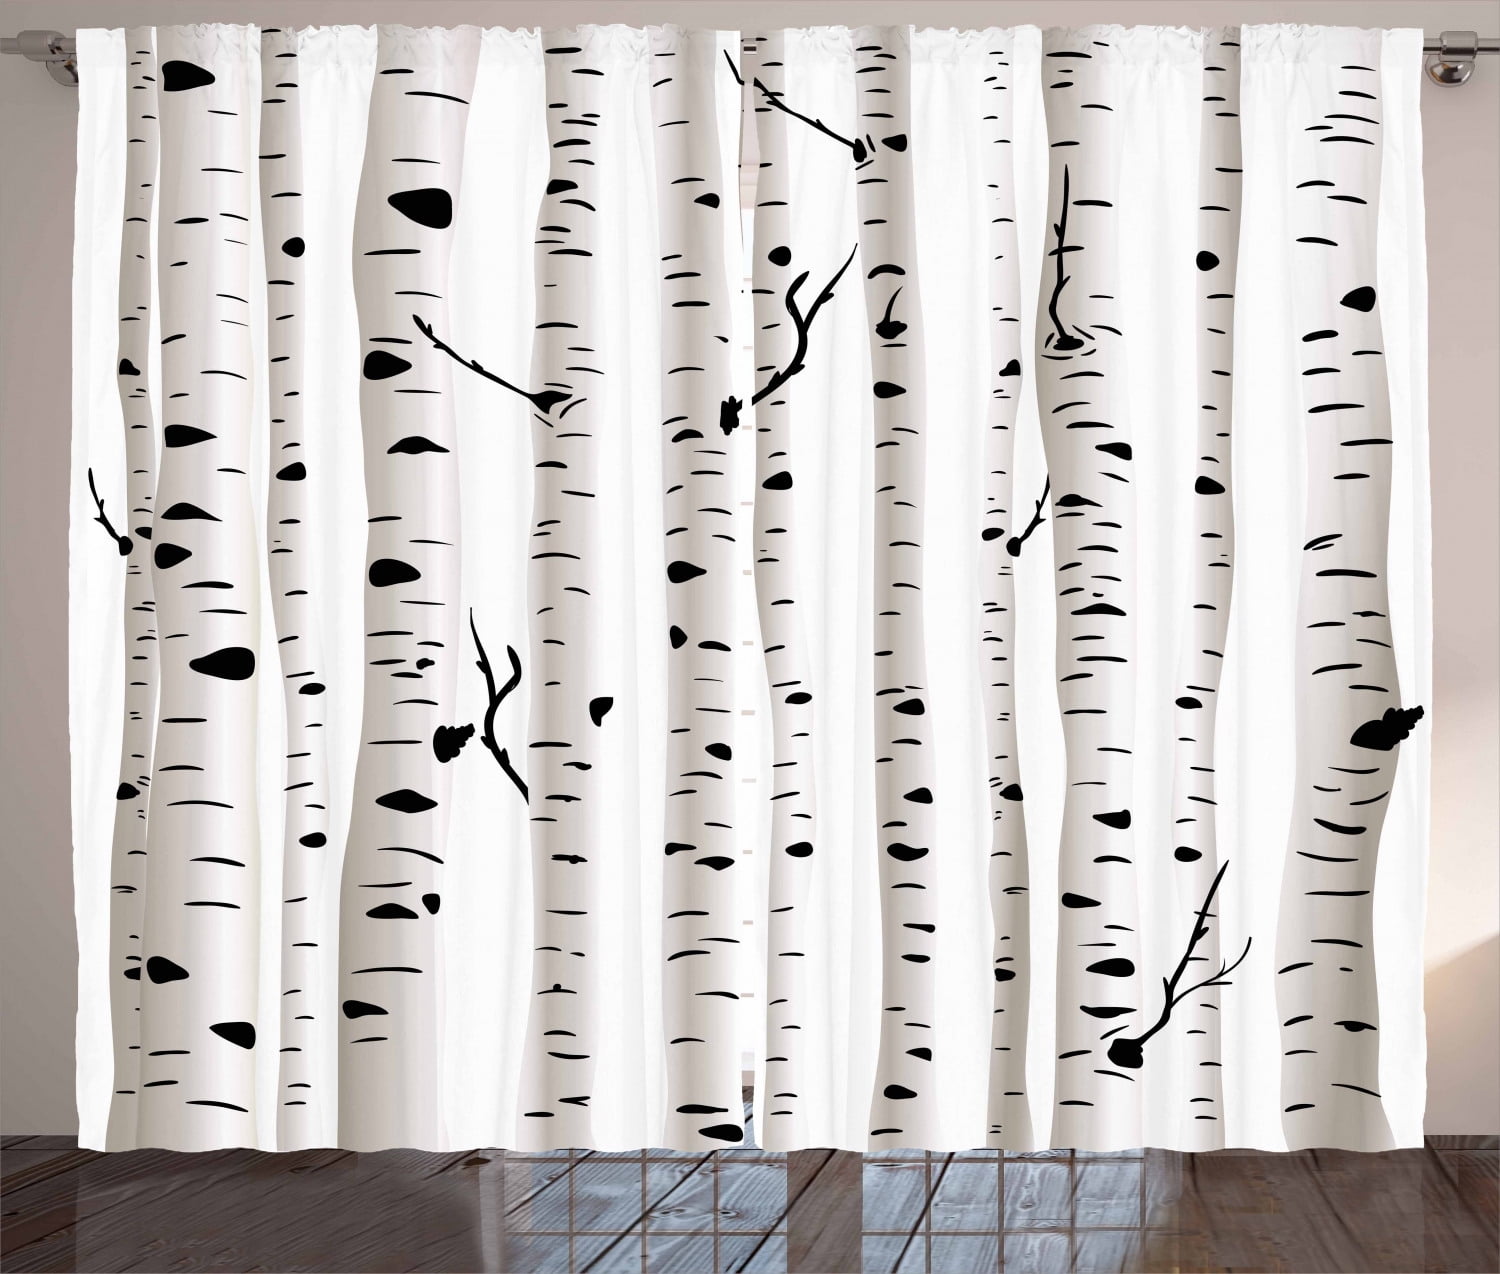 Nature Curtains Tree Braches in Spring Window Drapes 2 Panel Set 108x90 Inches 